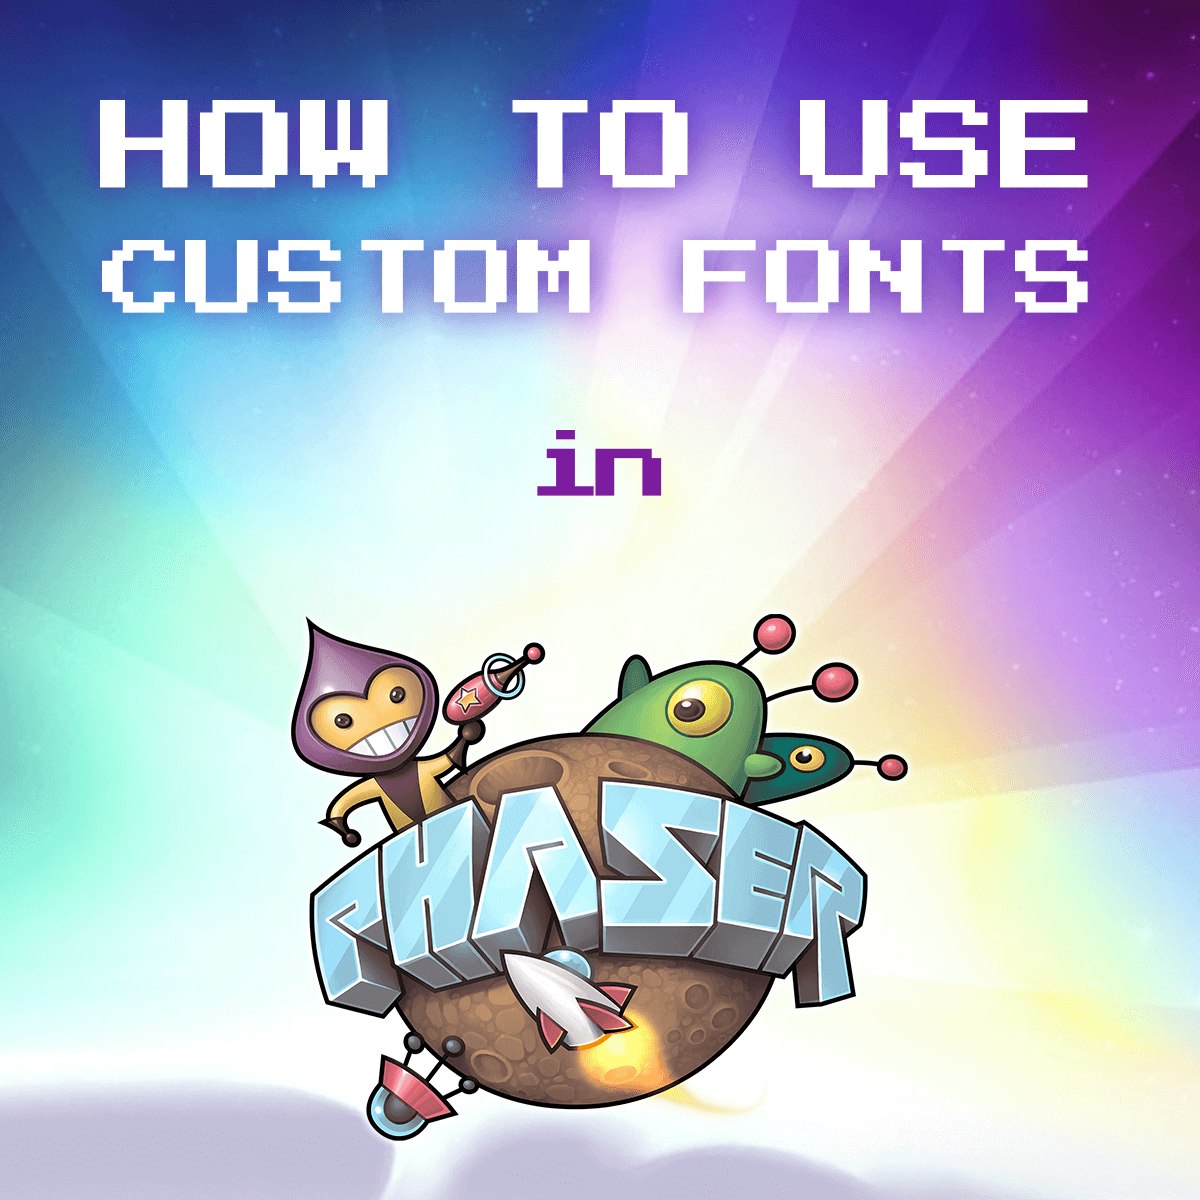 How to Use Custom Fonts in Phaser 3